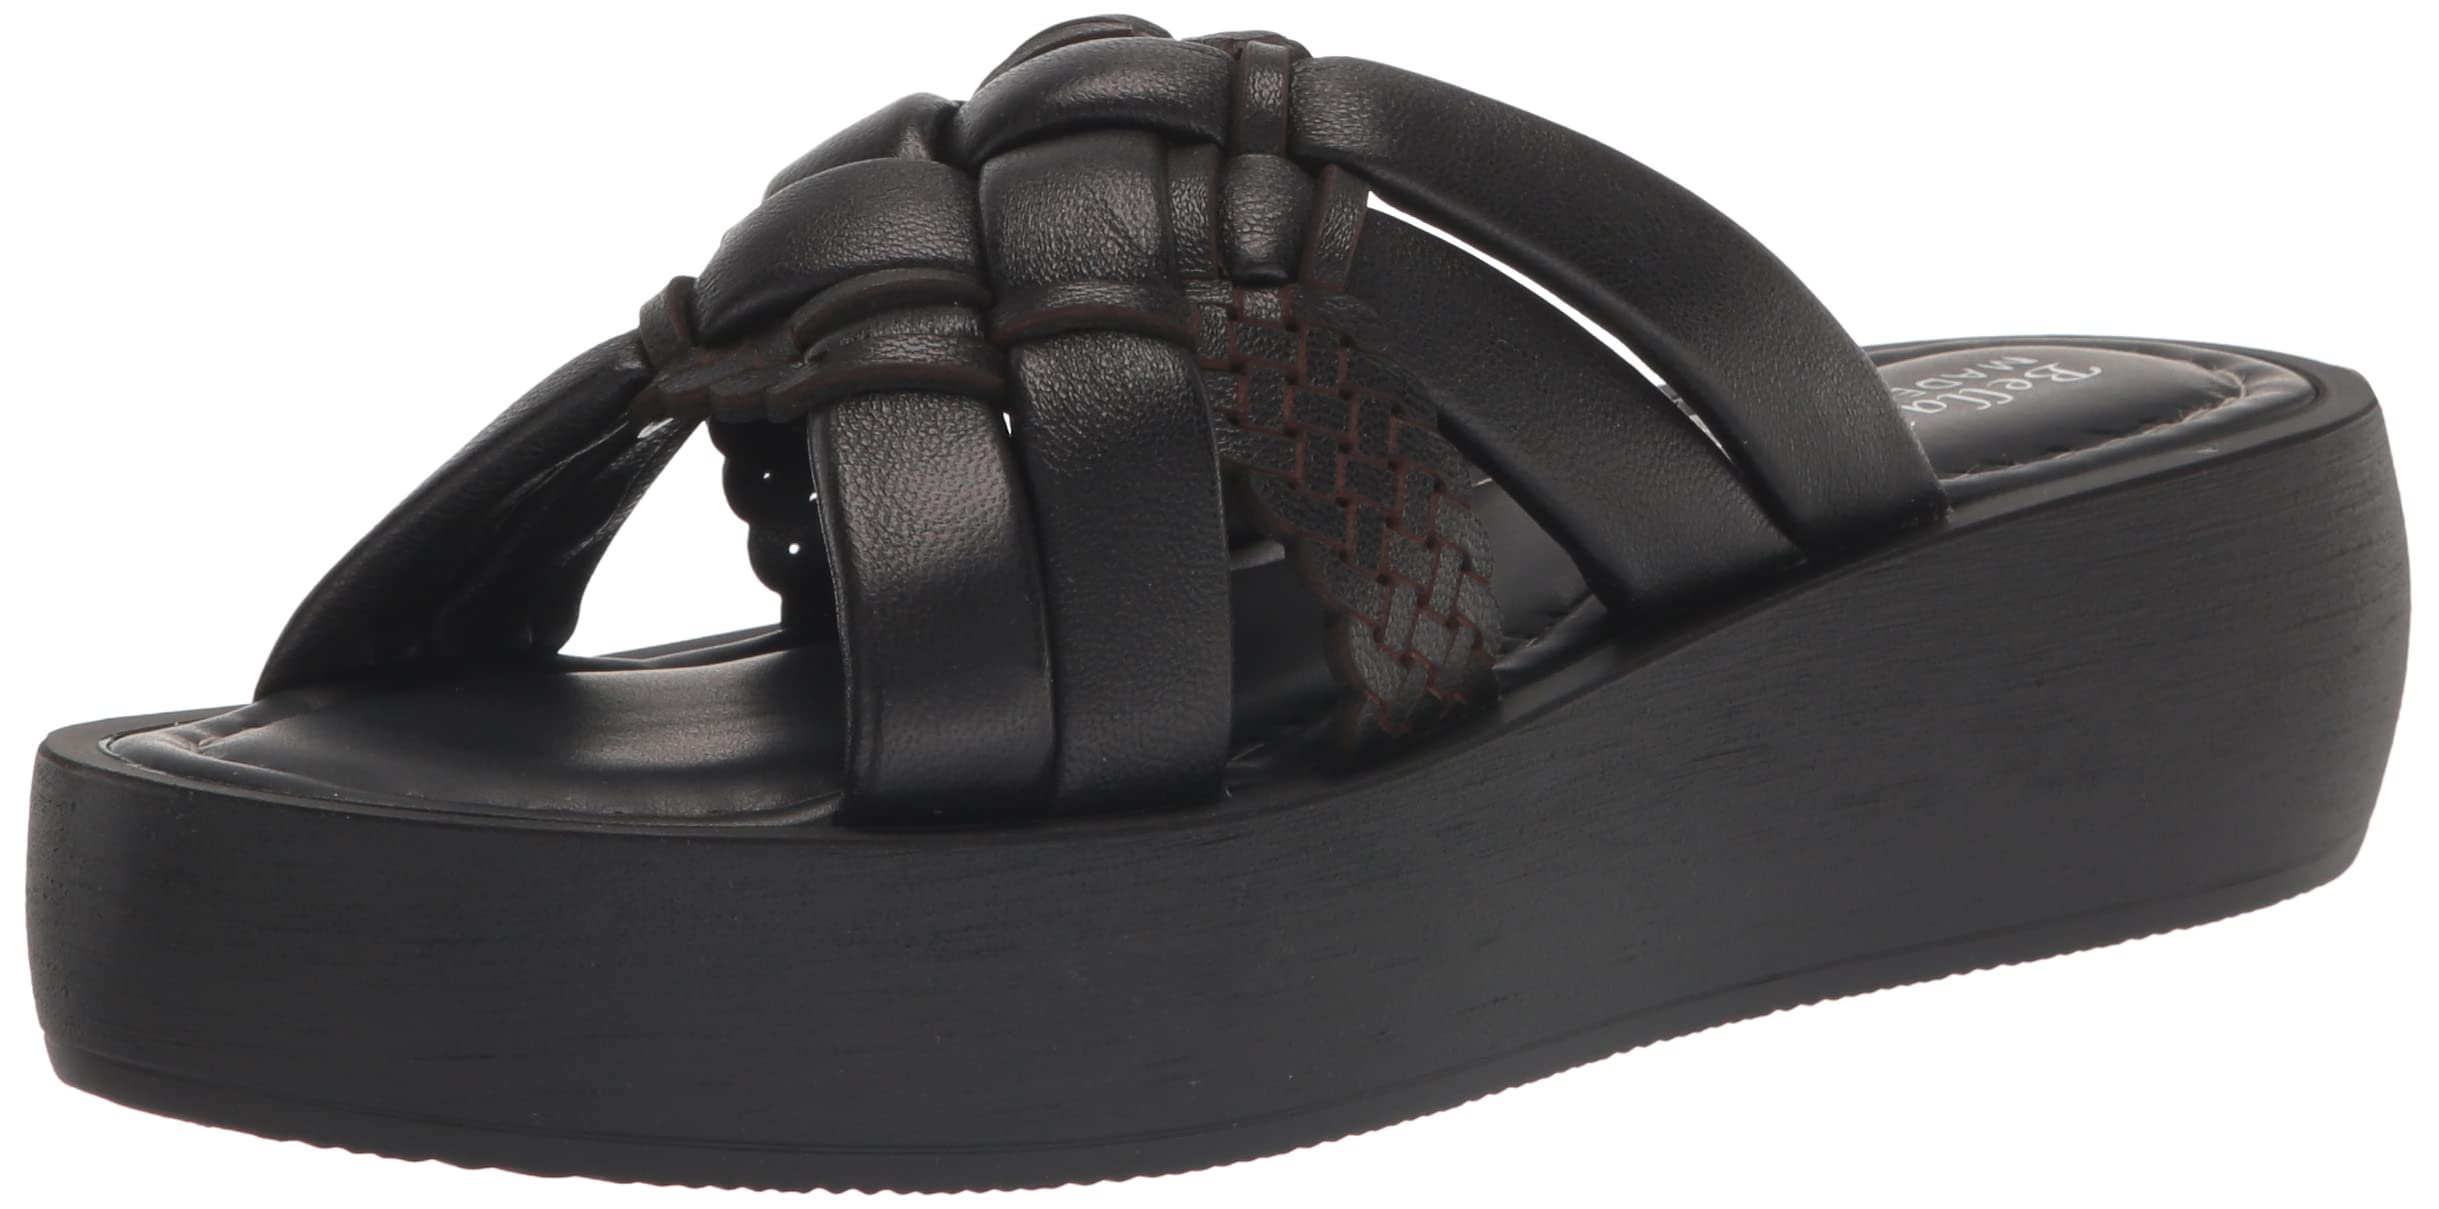 Bella Vita Made in Italy Women's Ned-Italy Slide Sandal, Black Leather, 8 X-Wide